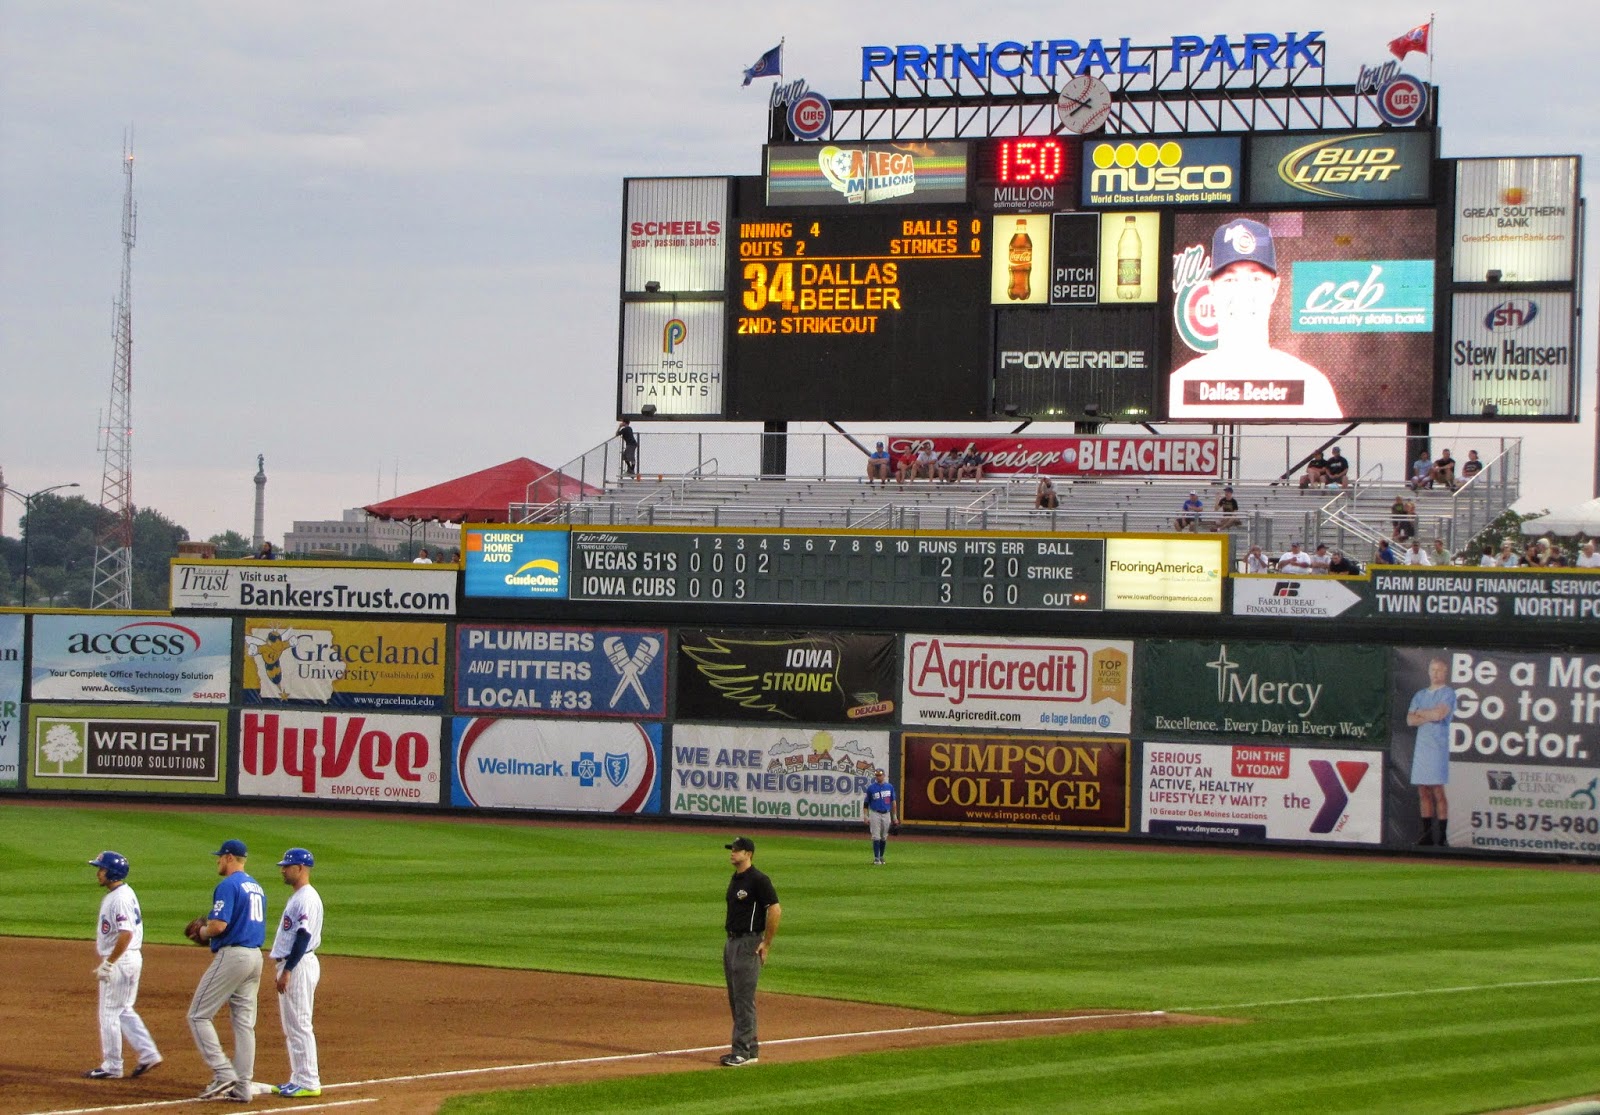 The Greatest 21 Days: Principal Park and Remembering My Dad